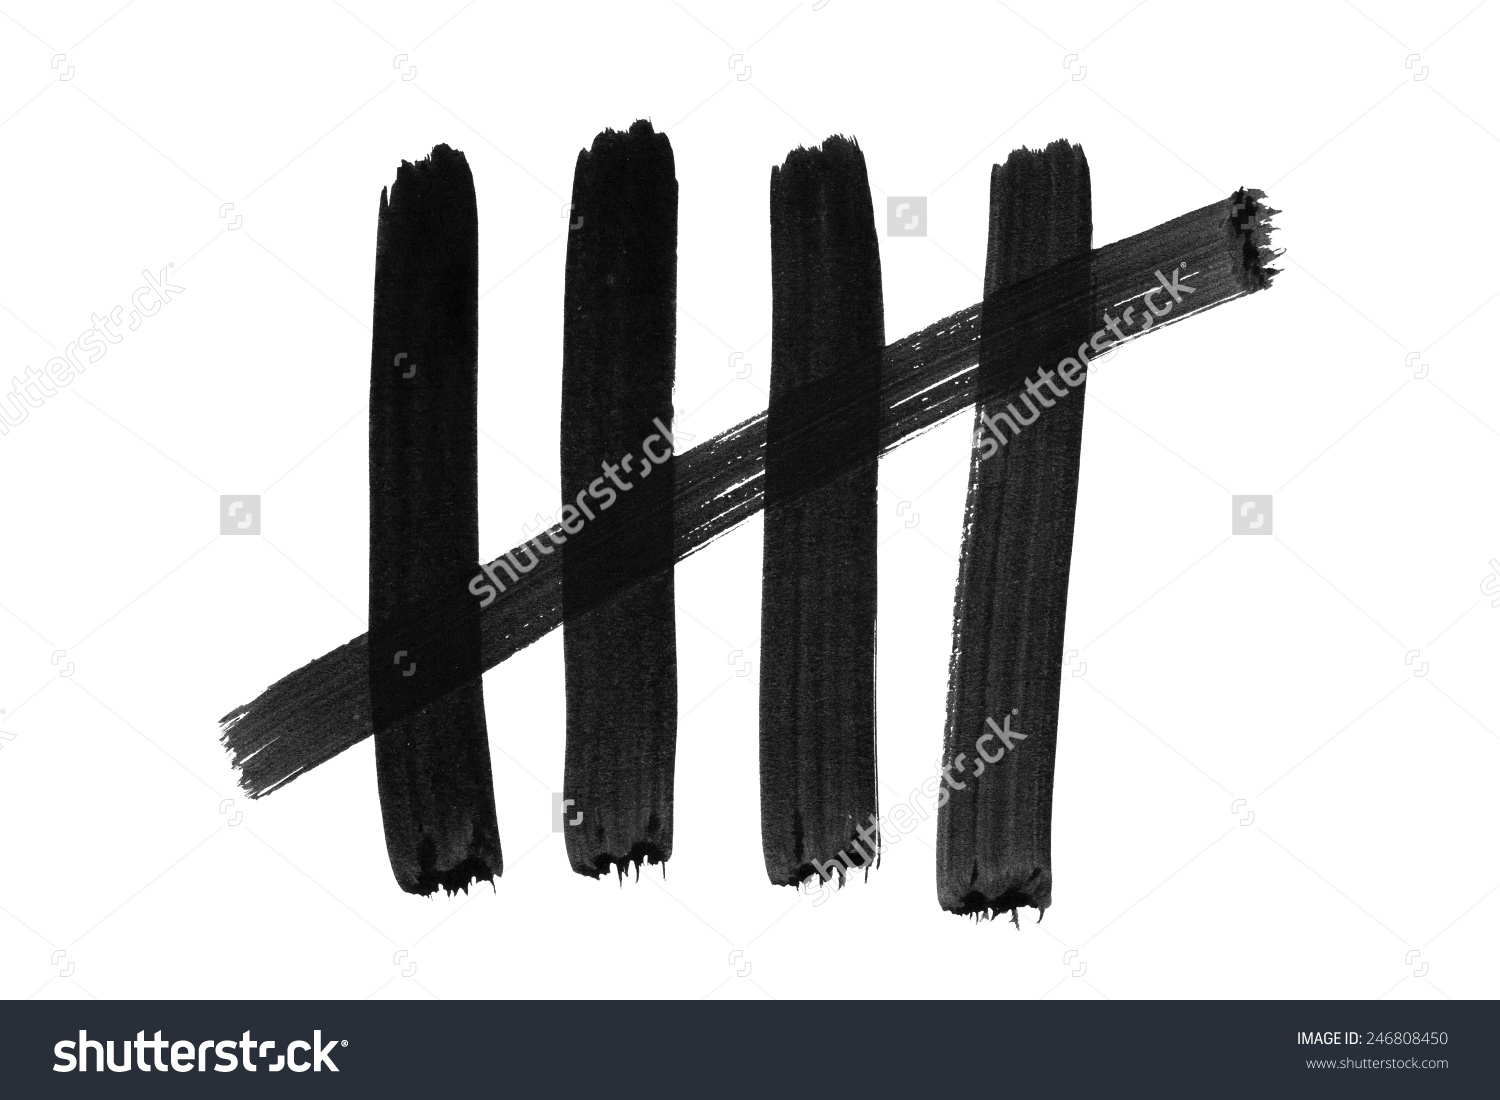 Showing post & media for Tally mark symbol.